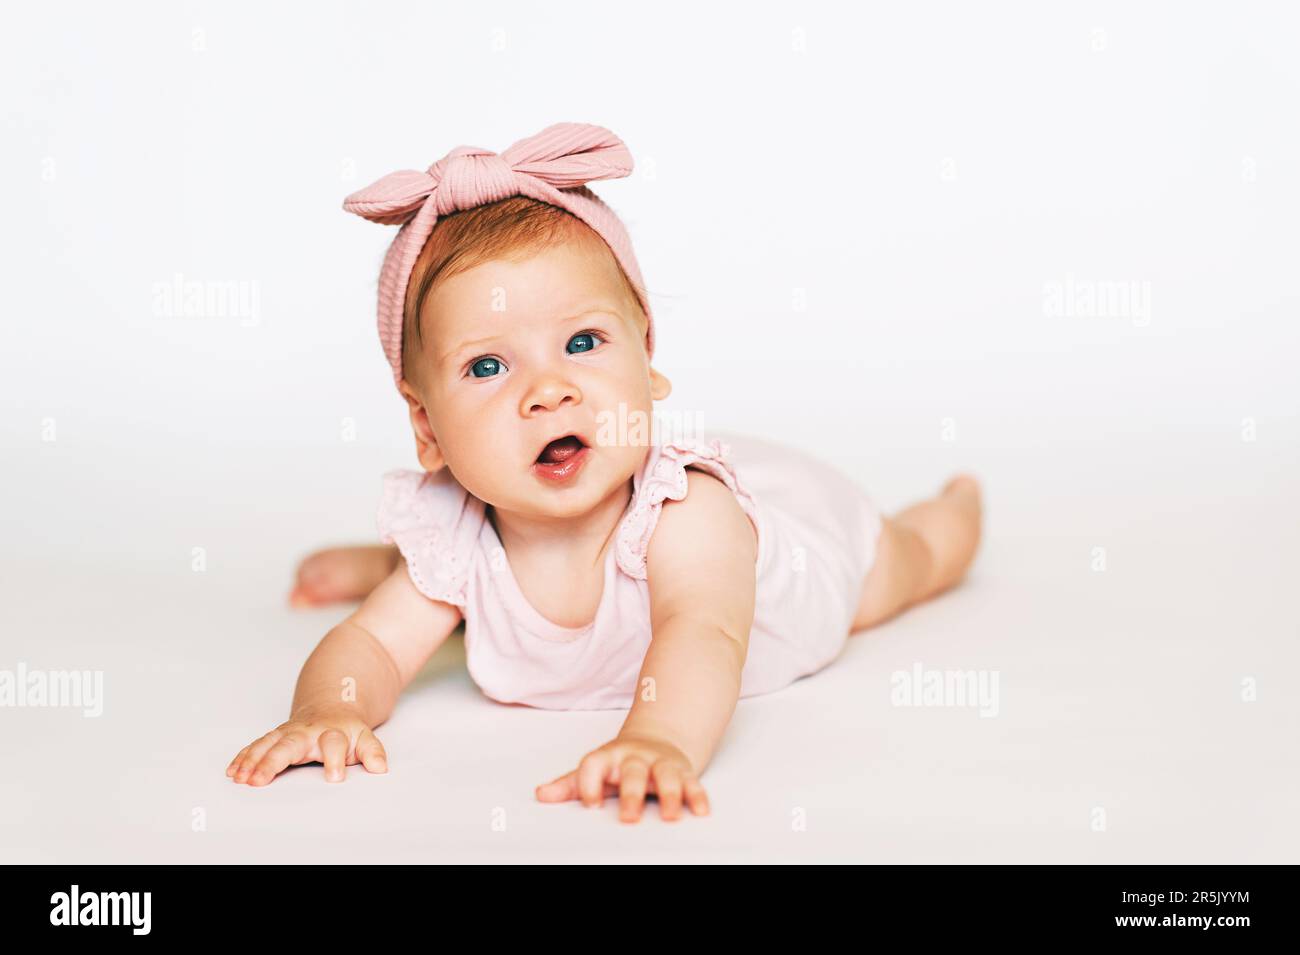 Portrait of adorable red-haired baby lying on belly, white background, wearing pink body and headband Stock Photo